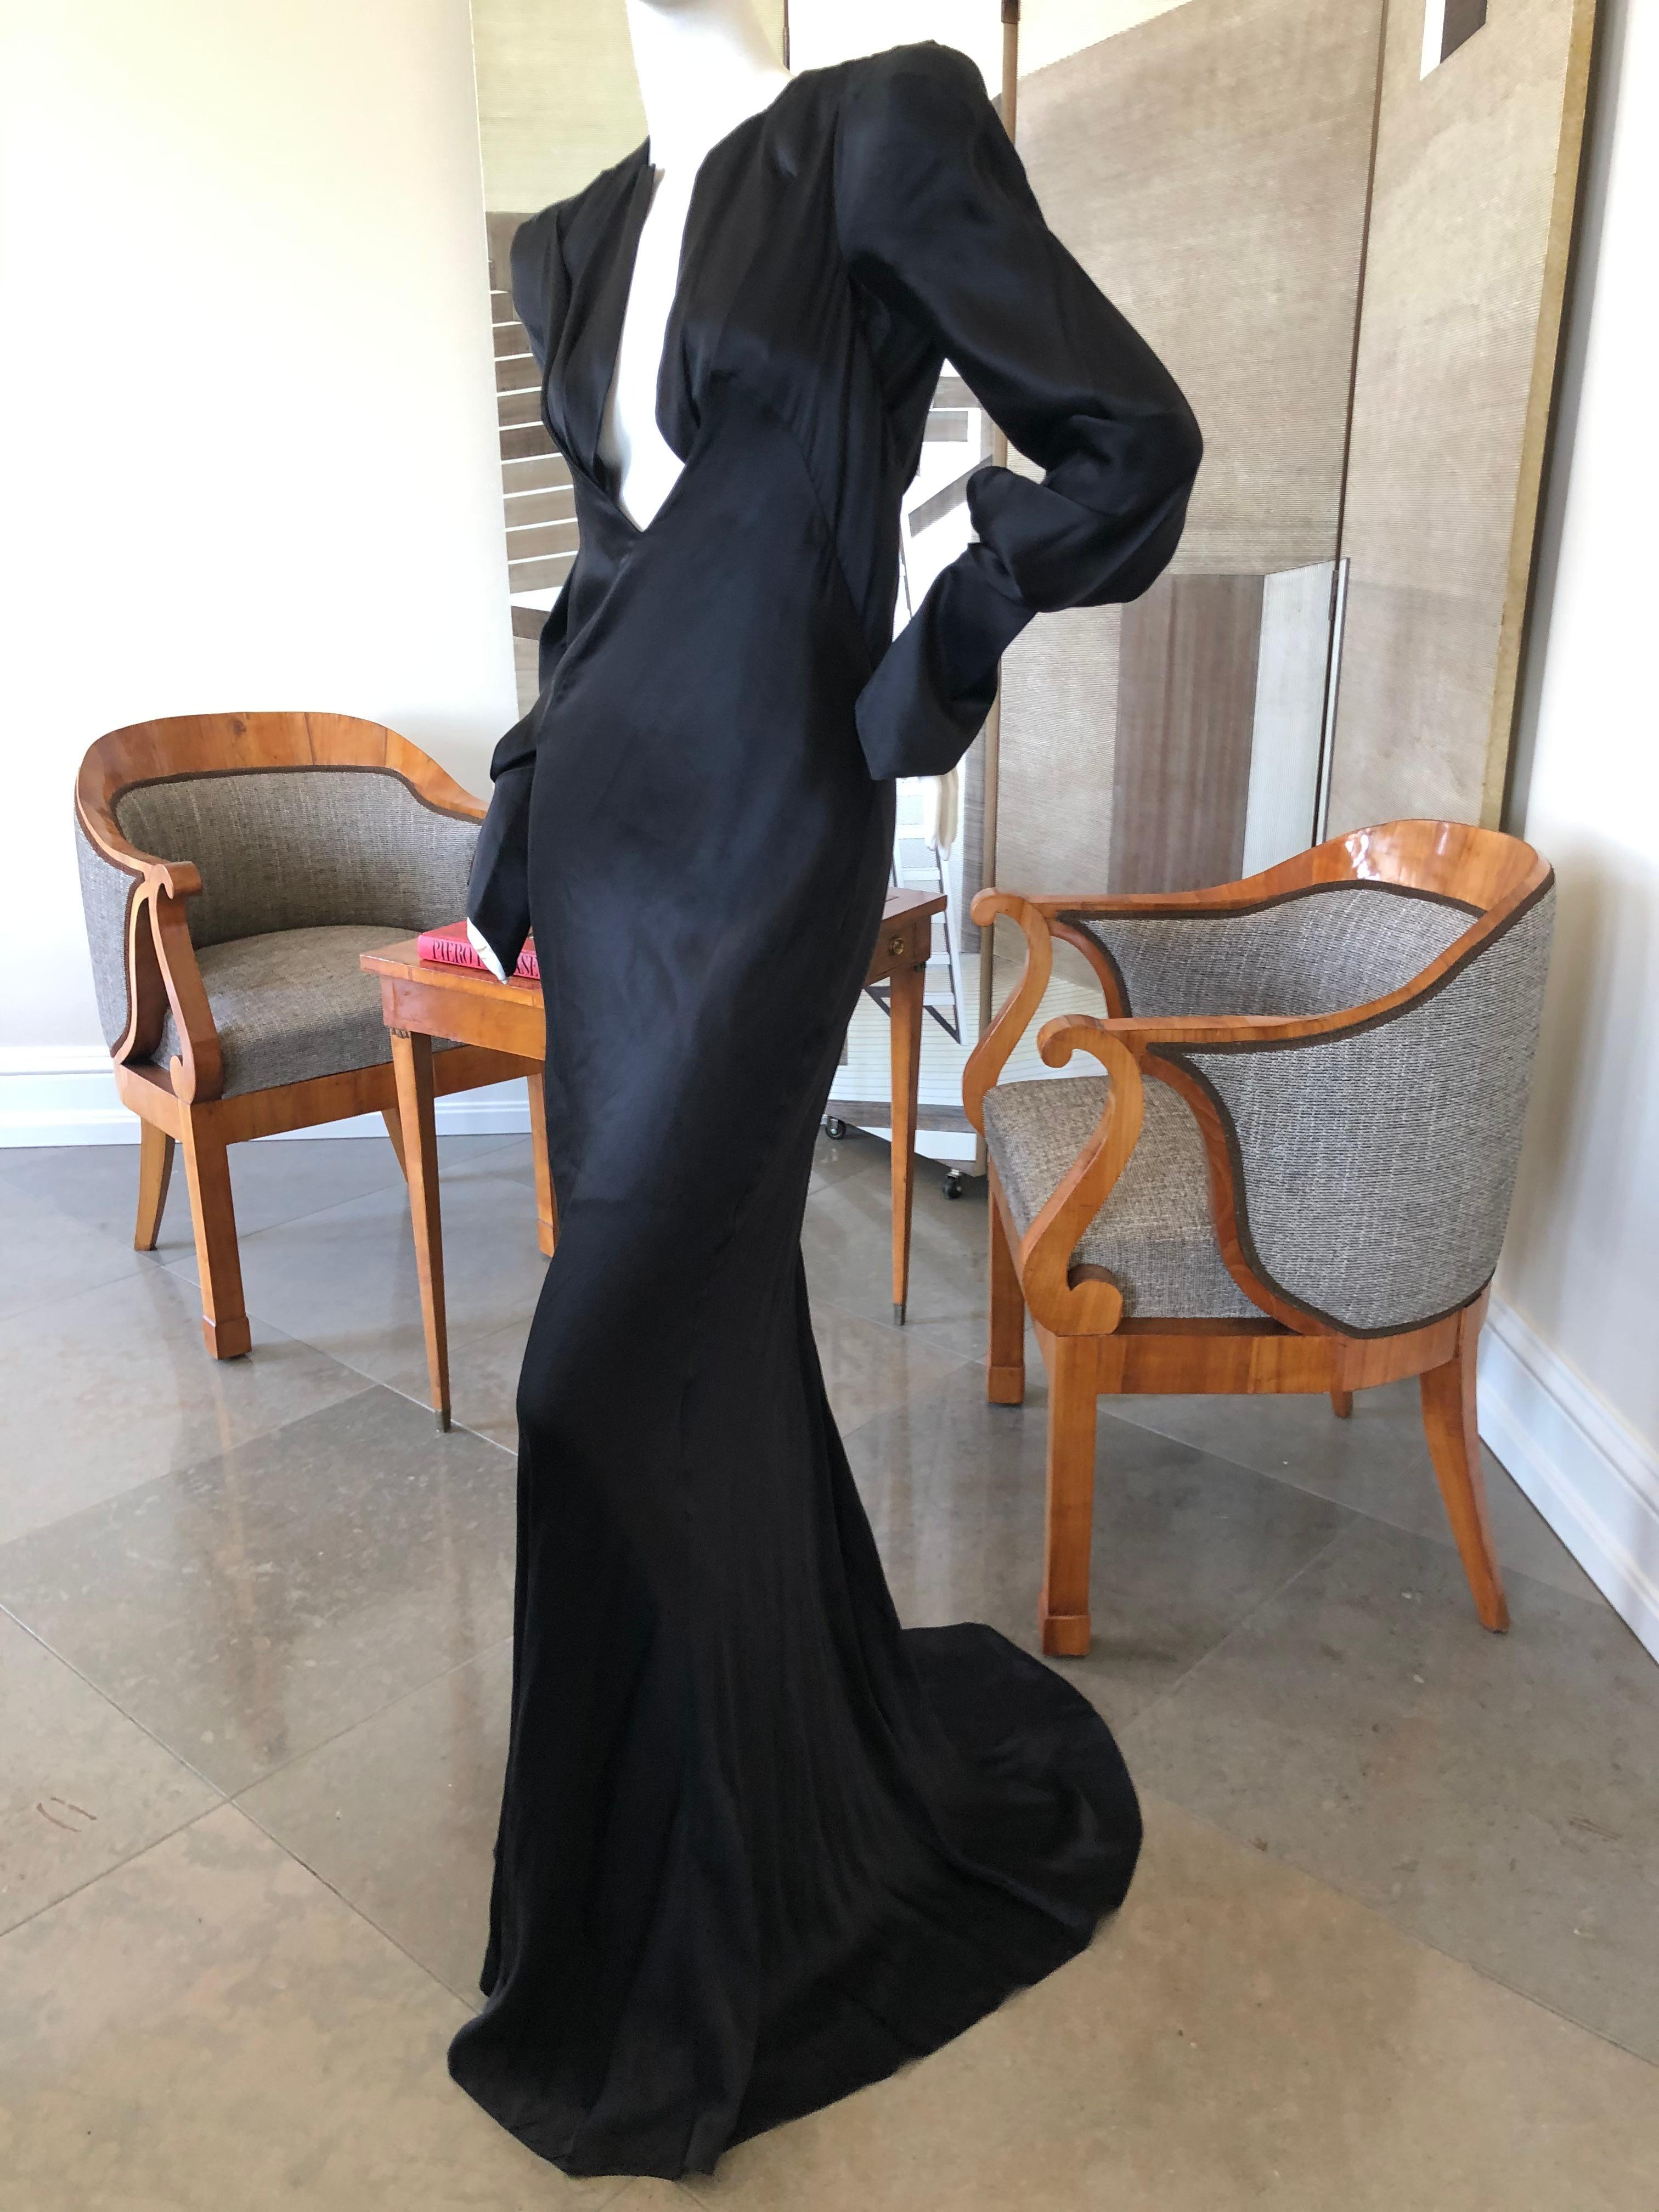 Olivier Theyskins Bias Cut Black Silk Plunging Evening Dress with Bold Shoulders In Excellent Condition For Sale In Cloverdale, CA